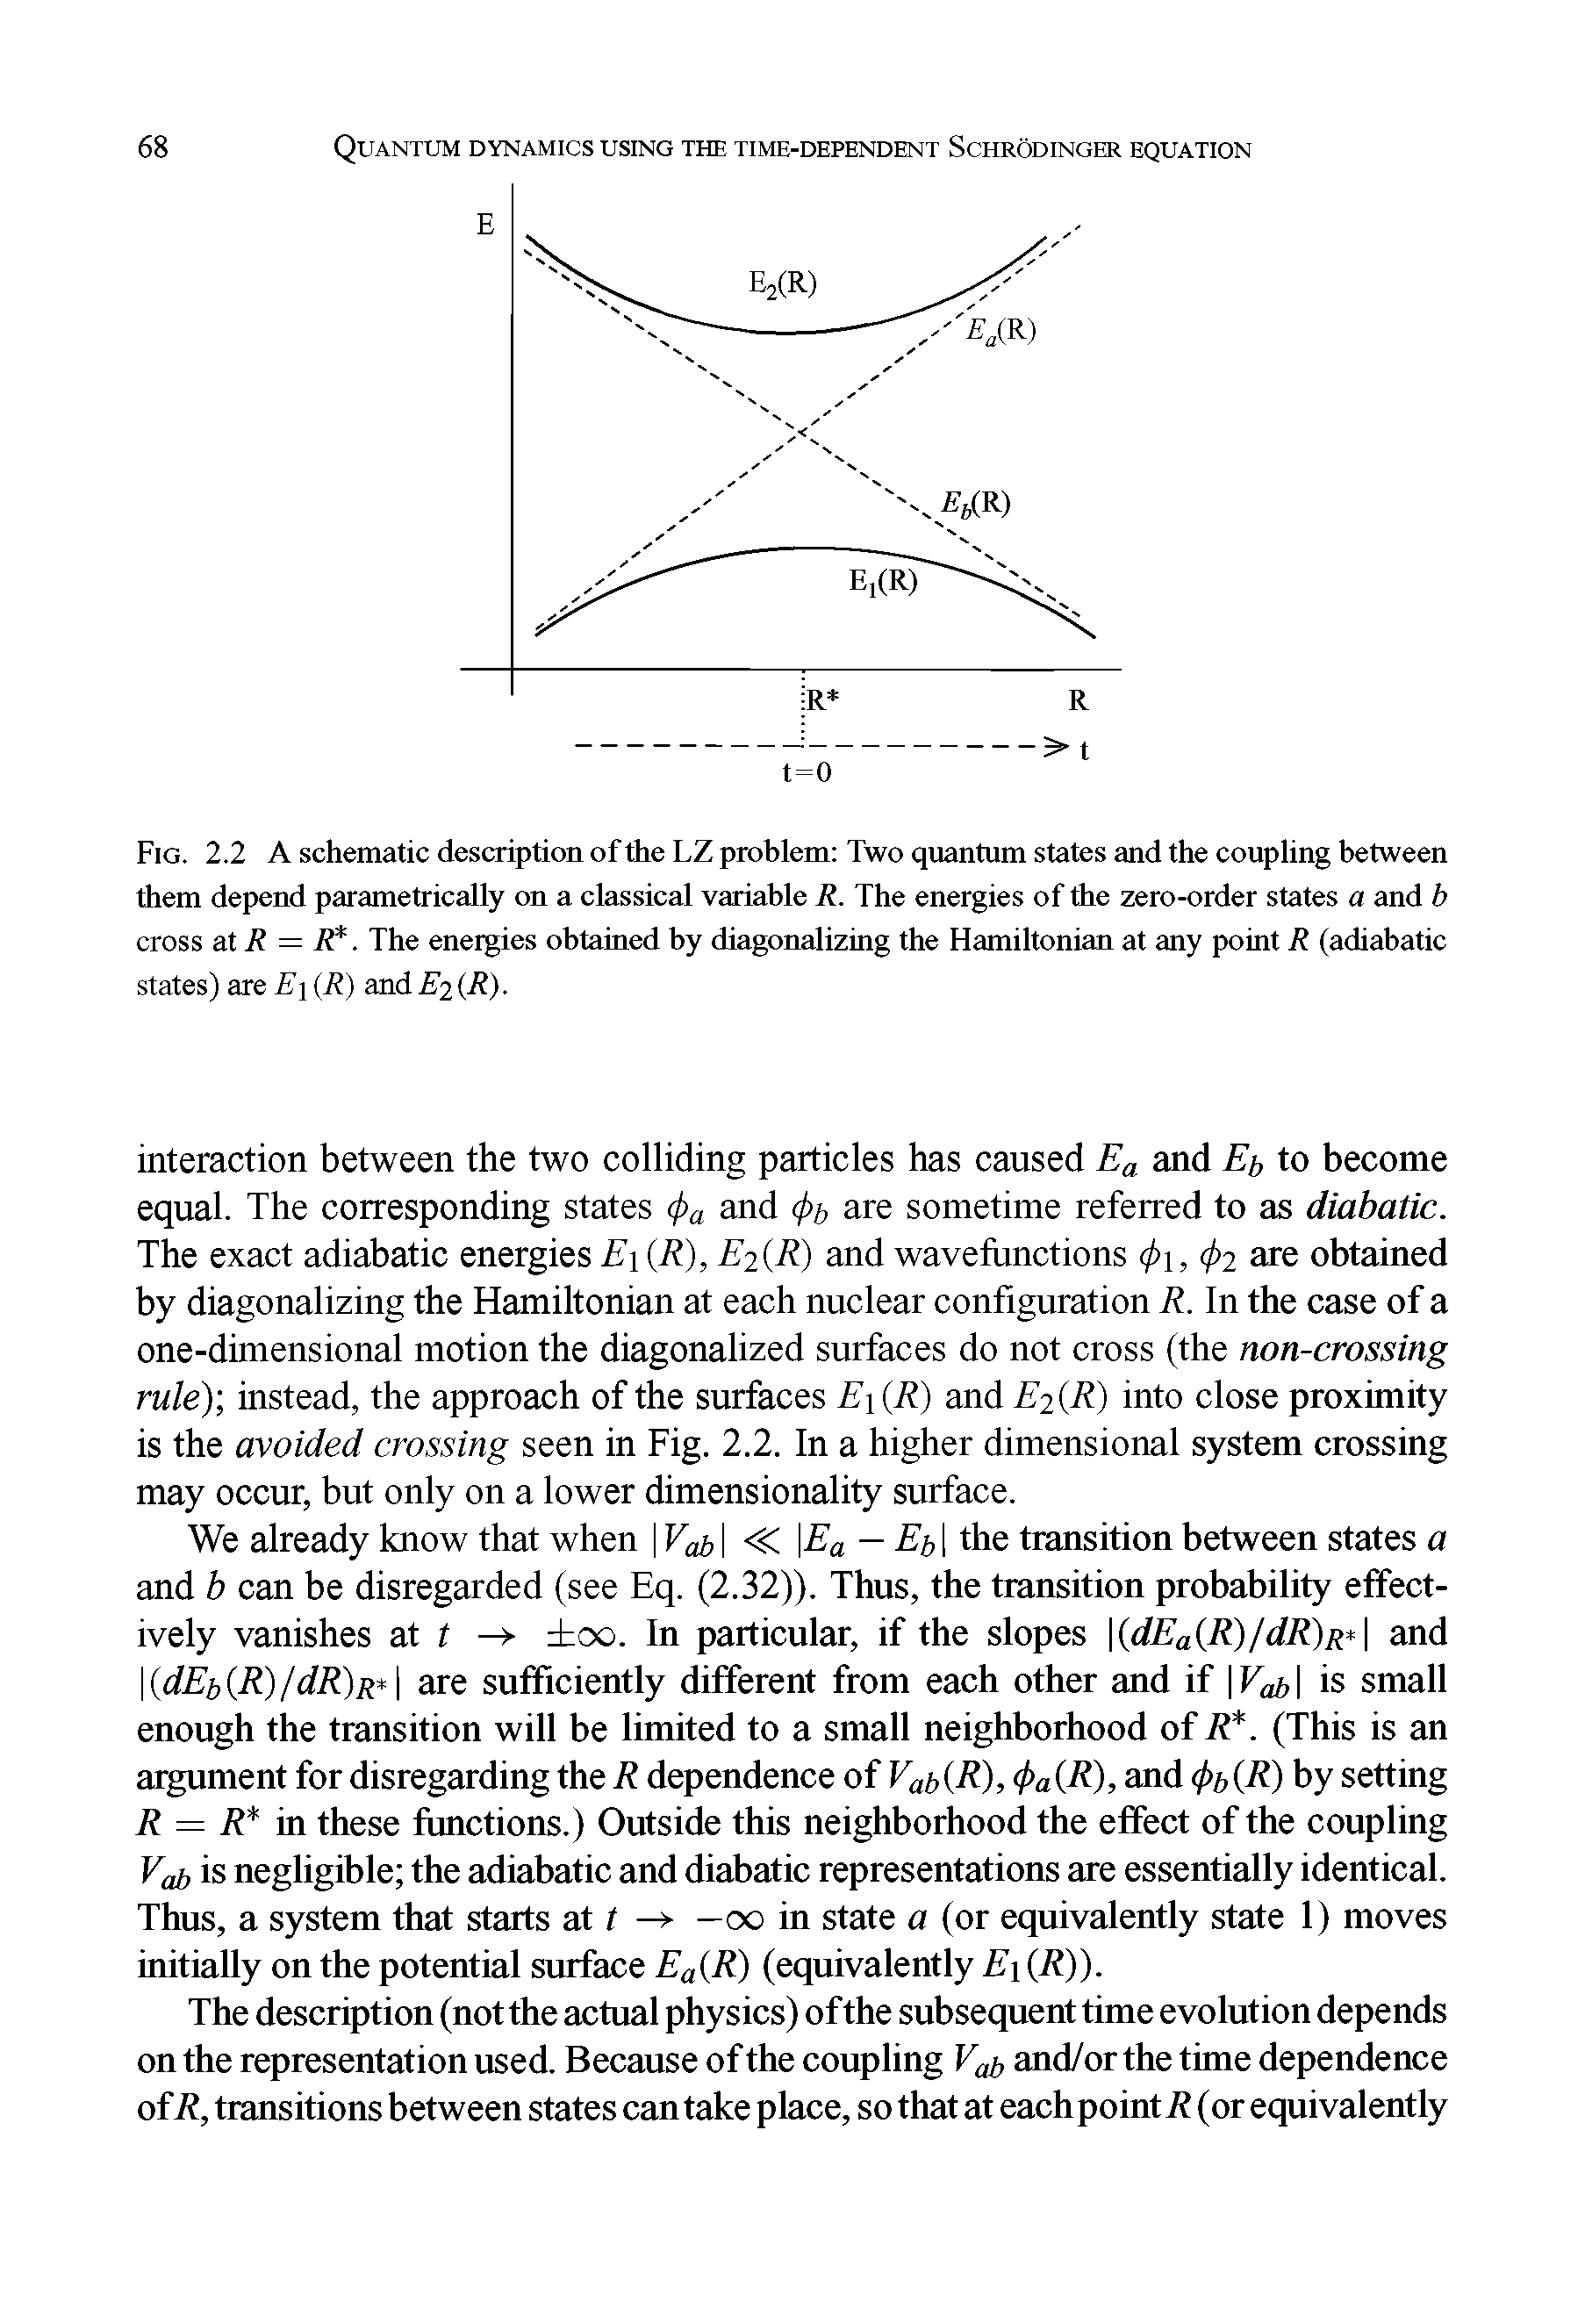 Fig. 2.2 A schematic description of the LZ problem Two quanmm states and the coupling between them depend parametrically on a classical variable ff. The energies of the zero-order states a and b cross at R = R. The energies obtained by diagonalizing the Hamiltonian at any point R (adiabatic states) are ] (R) aDdE2(R).